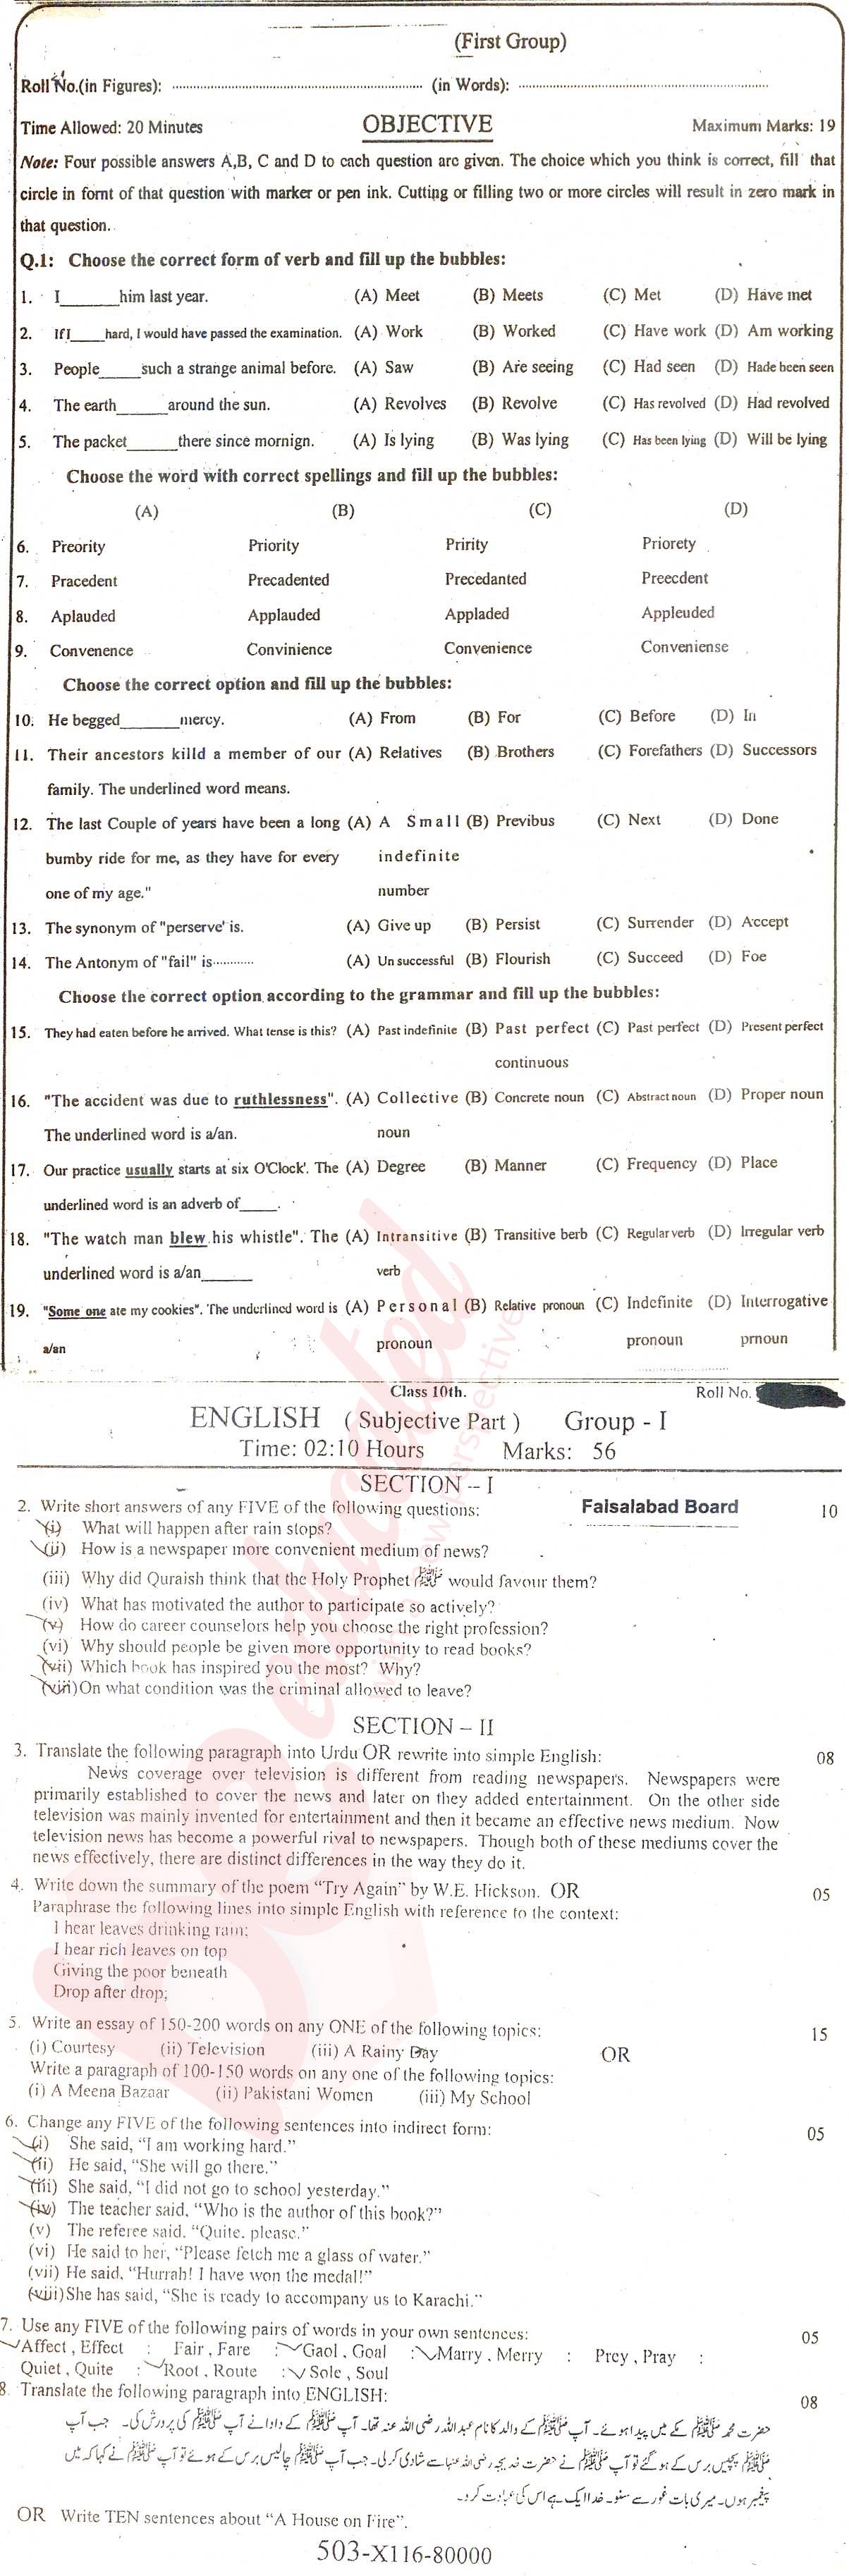 English 10th class Past Paper Group 1 BISE Faisalabad 2016